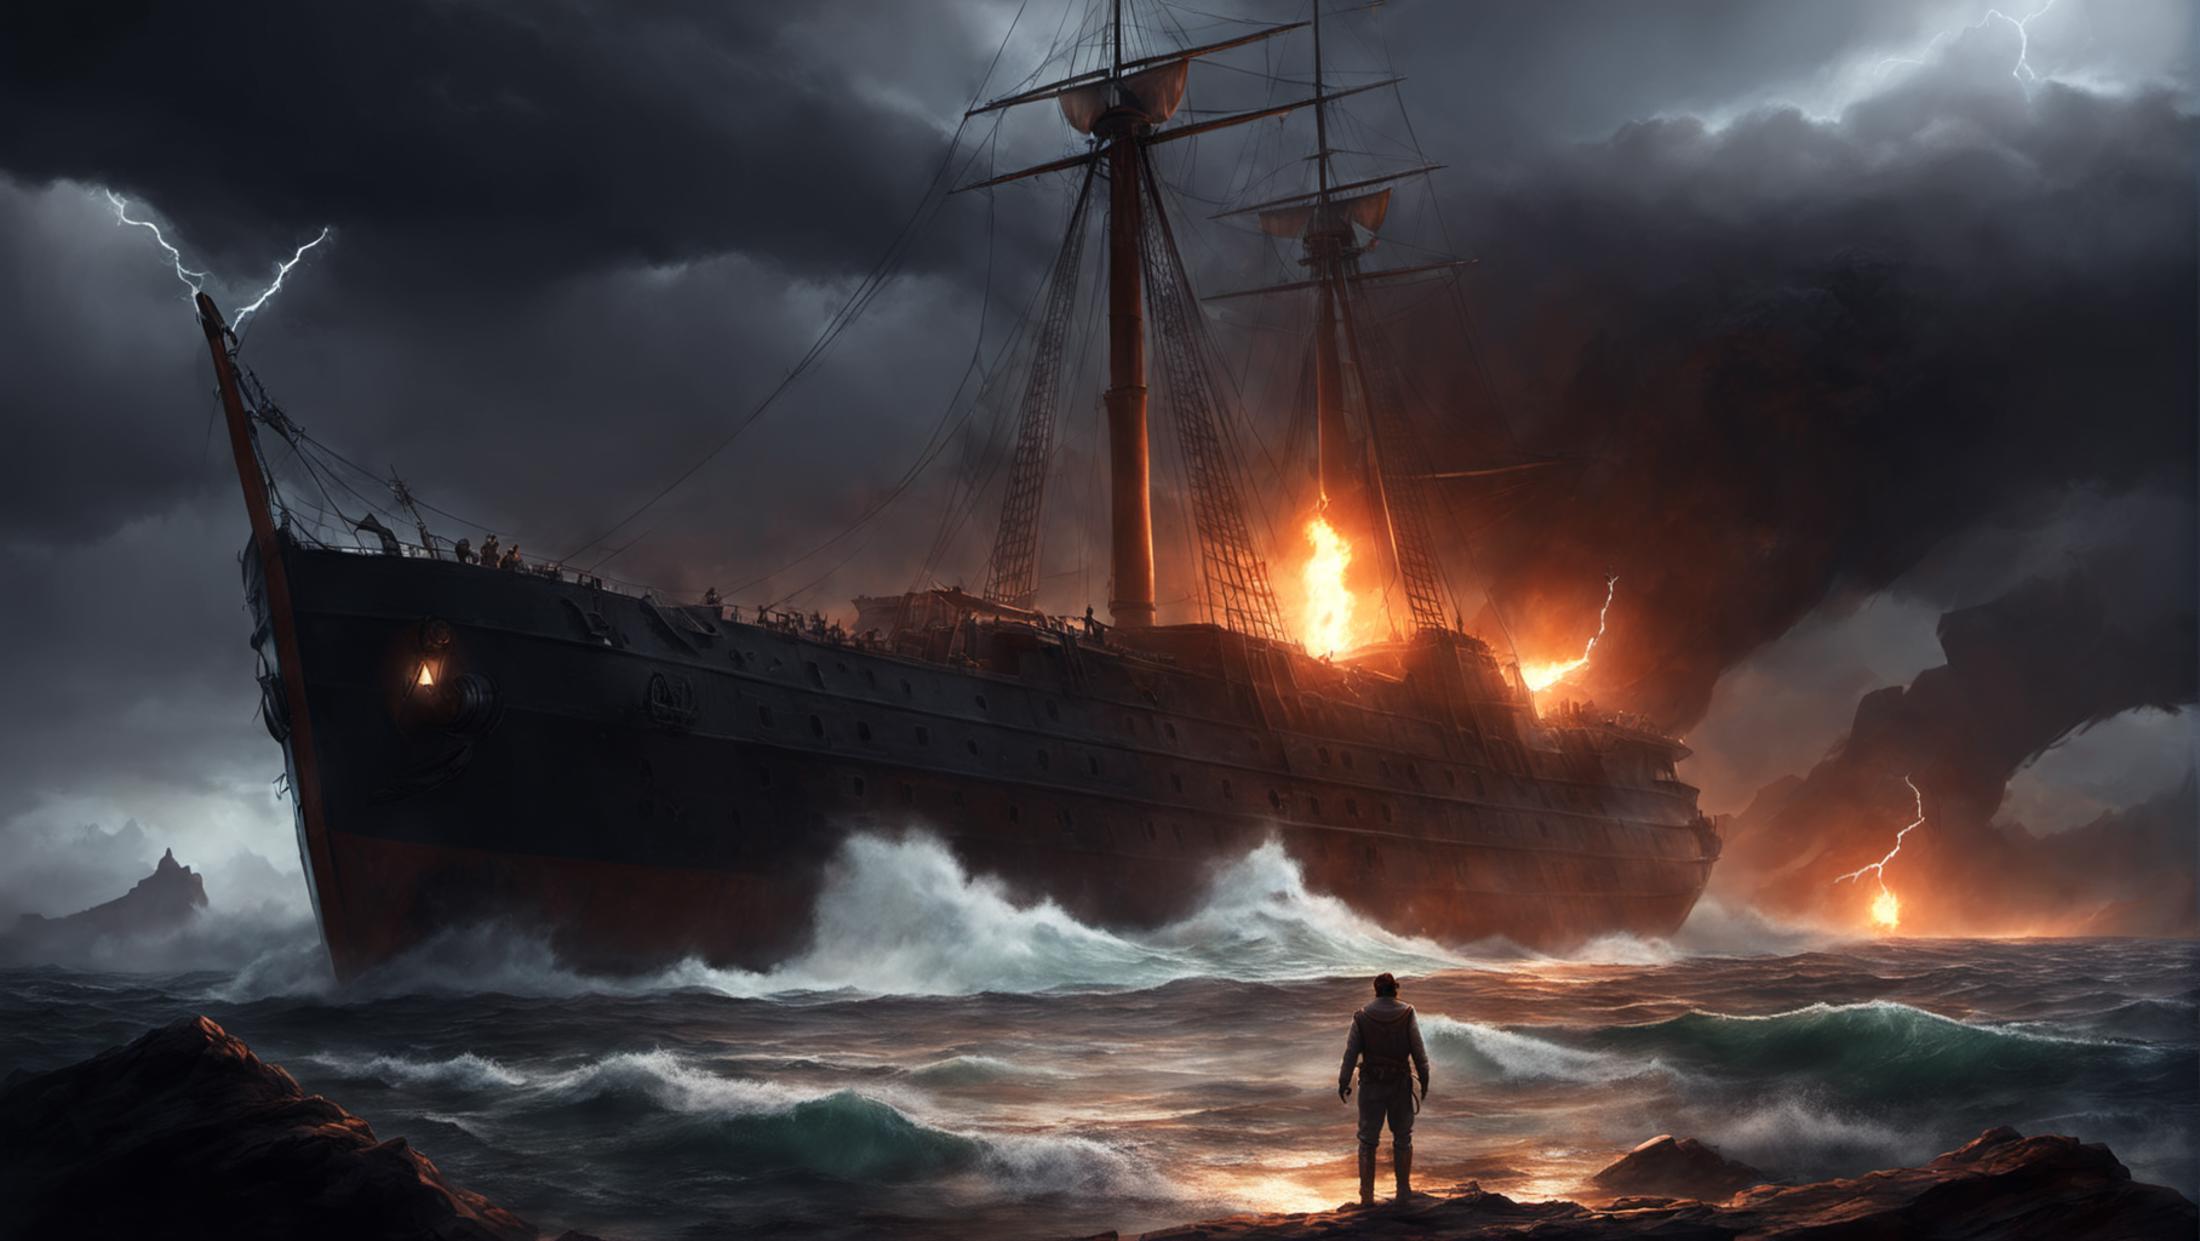 A man standing in the ocean next to a massive ship on fire.